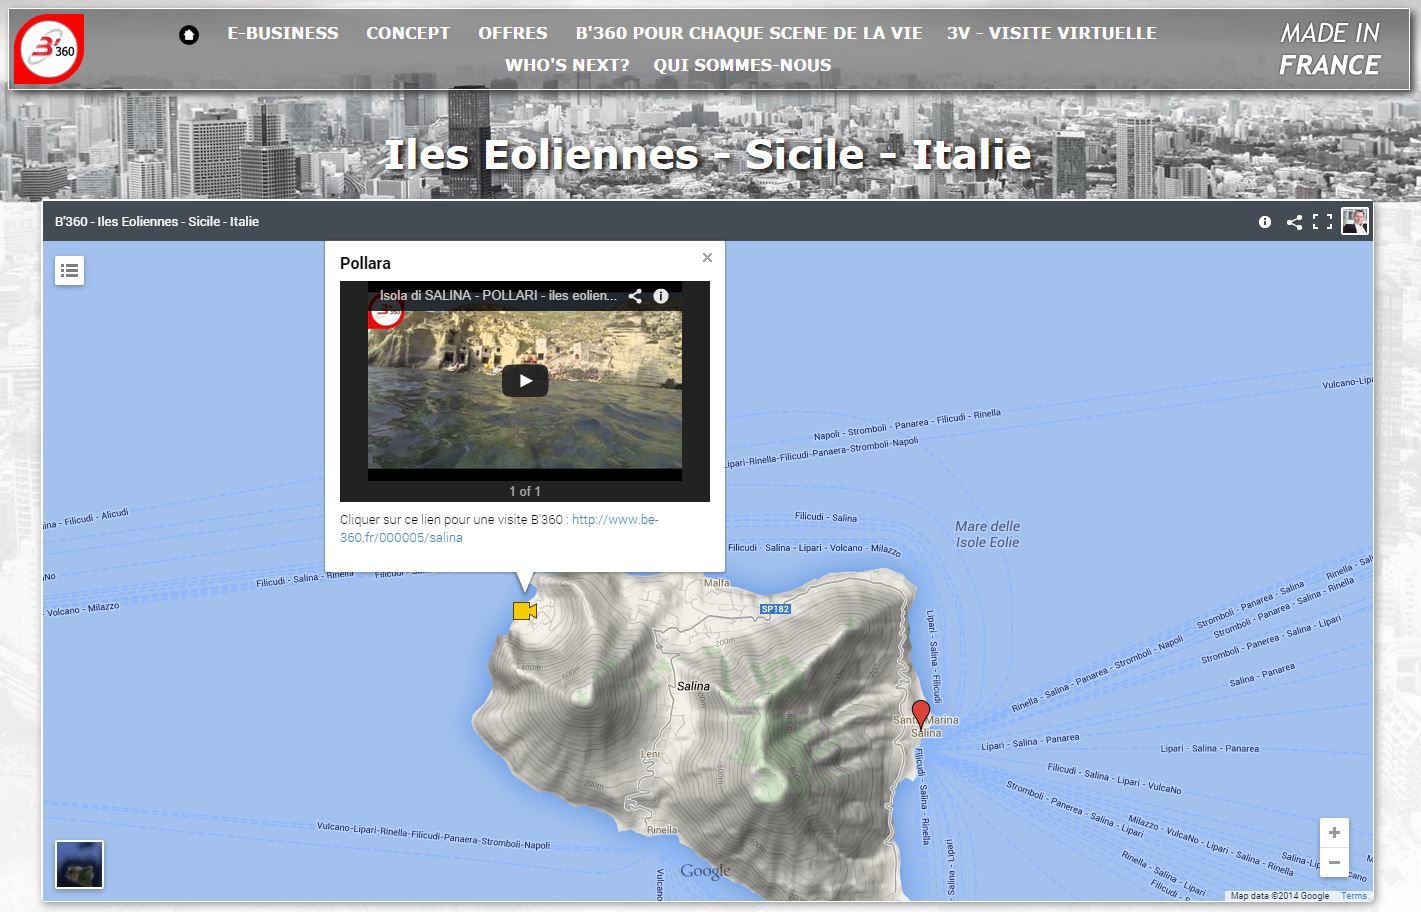 E-tourism : You-Must-Watch-IT - Something dramatically NEW ! Sicily - Italy - Eolian islands - B'360 !